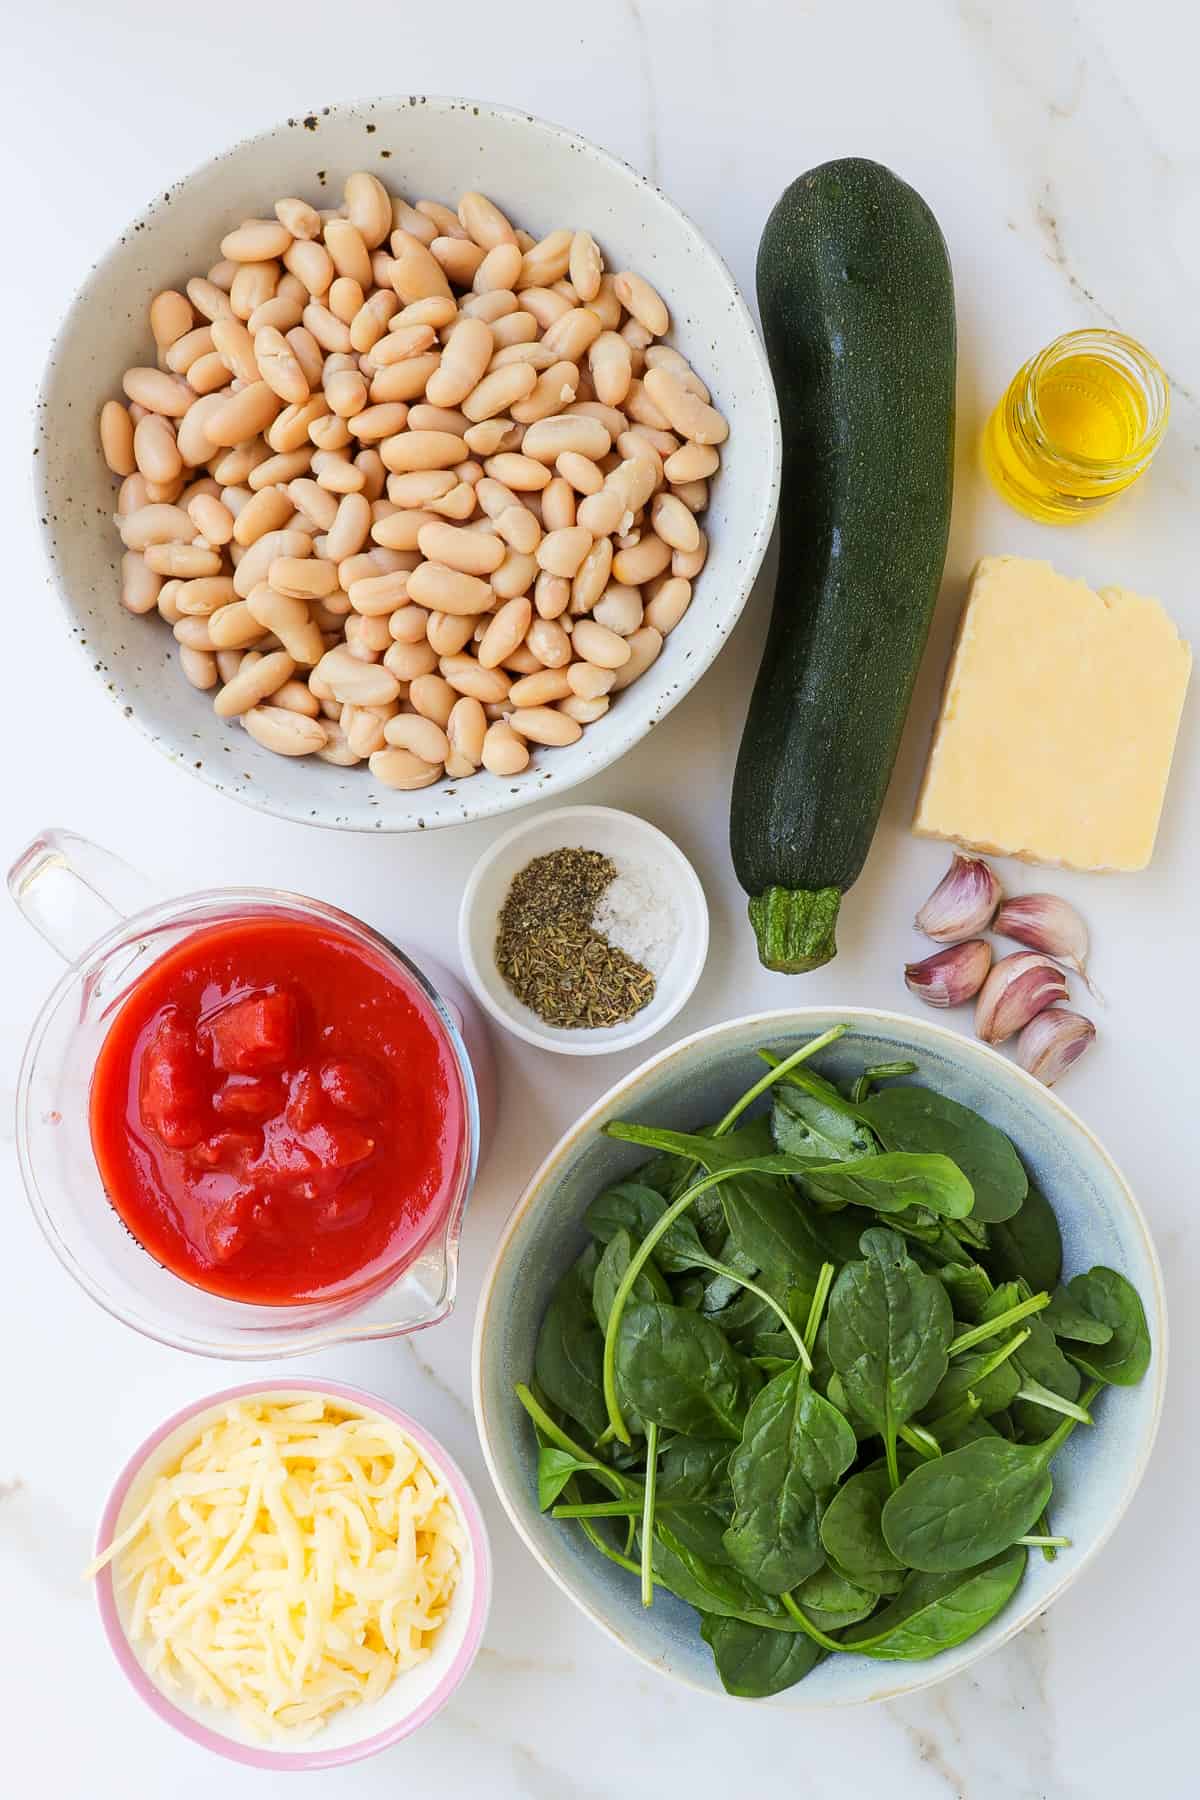 Ingredients shown to make the cheesy baked white beans.